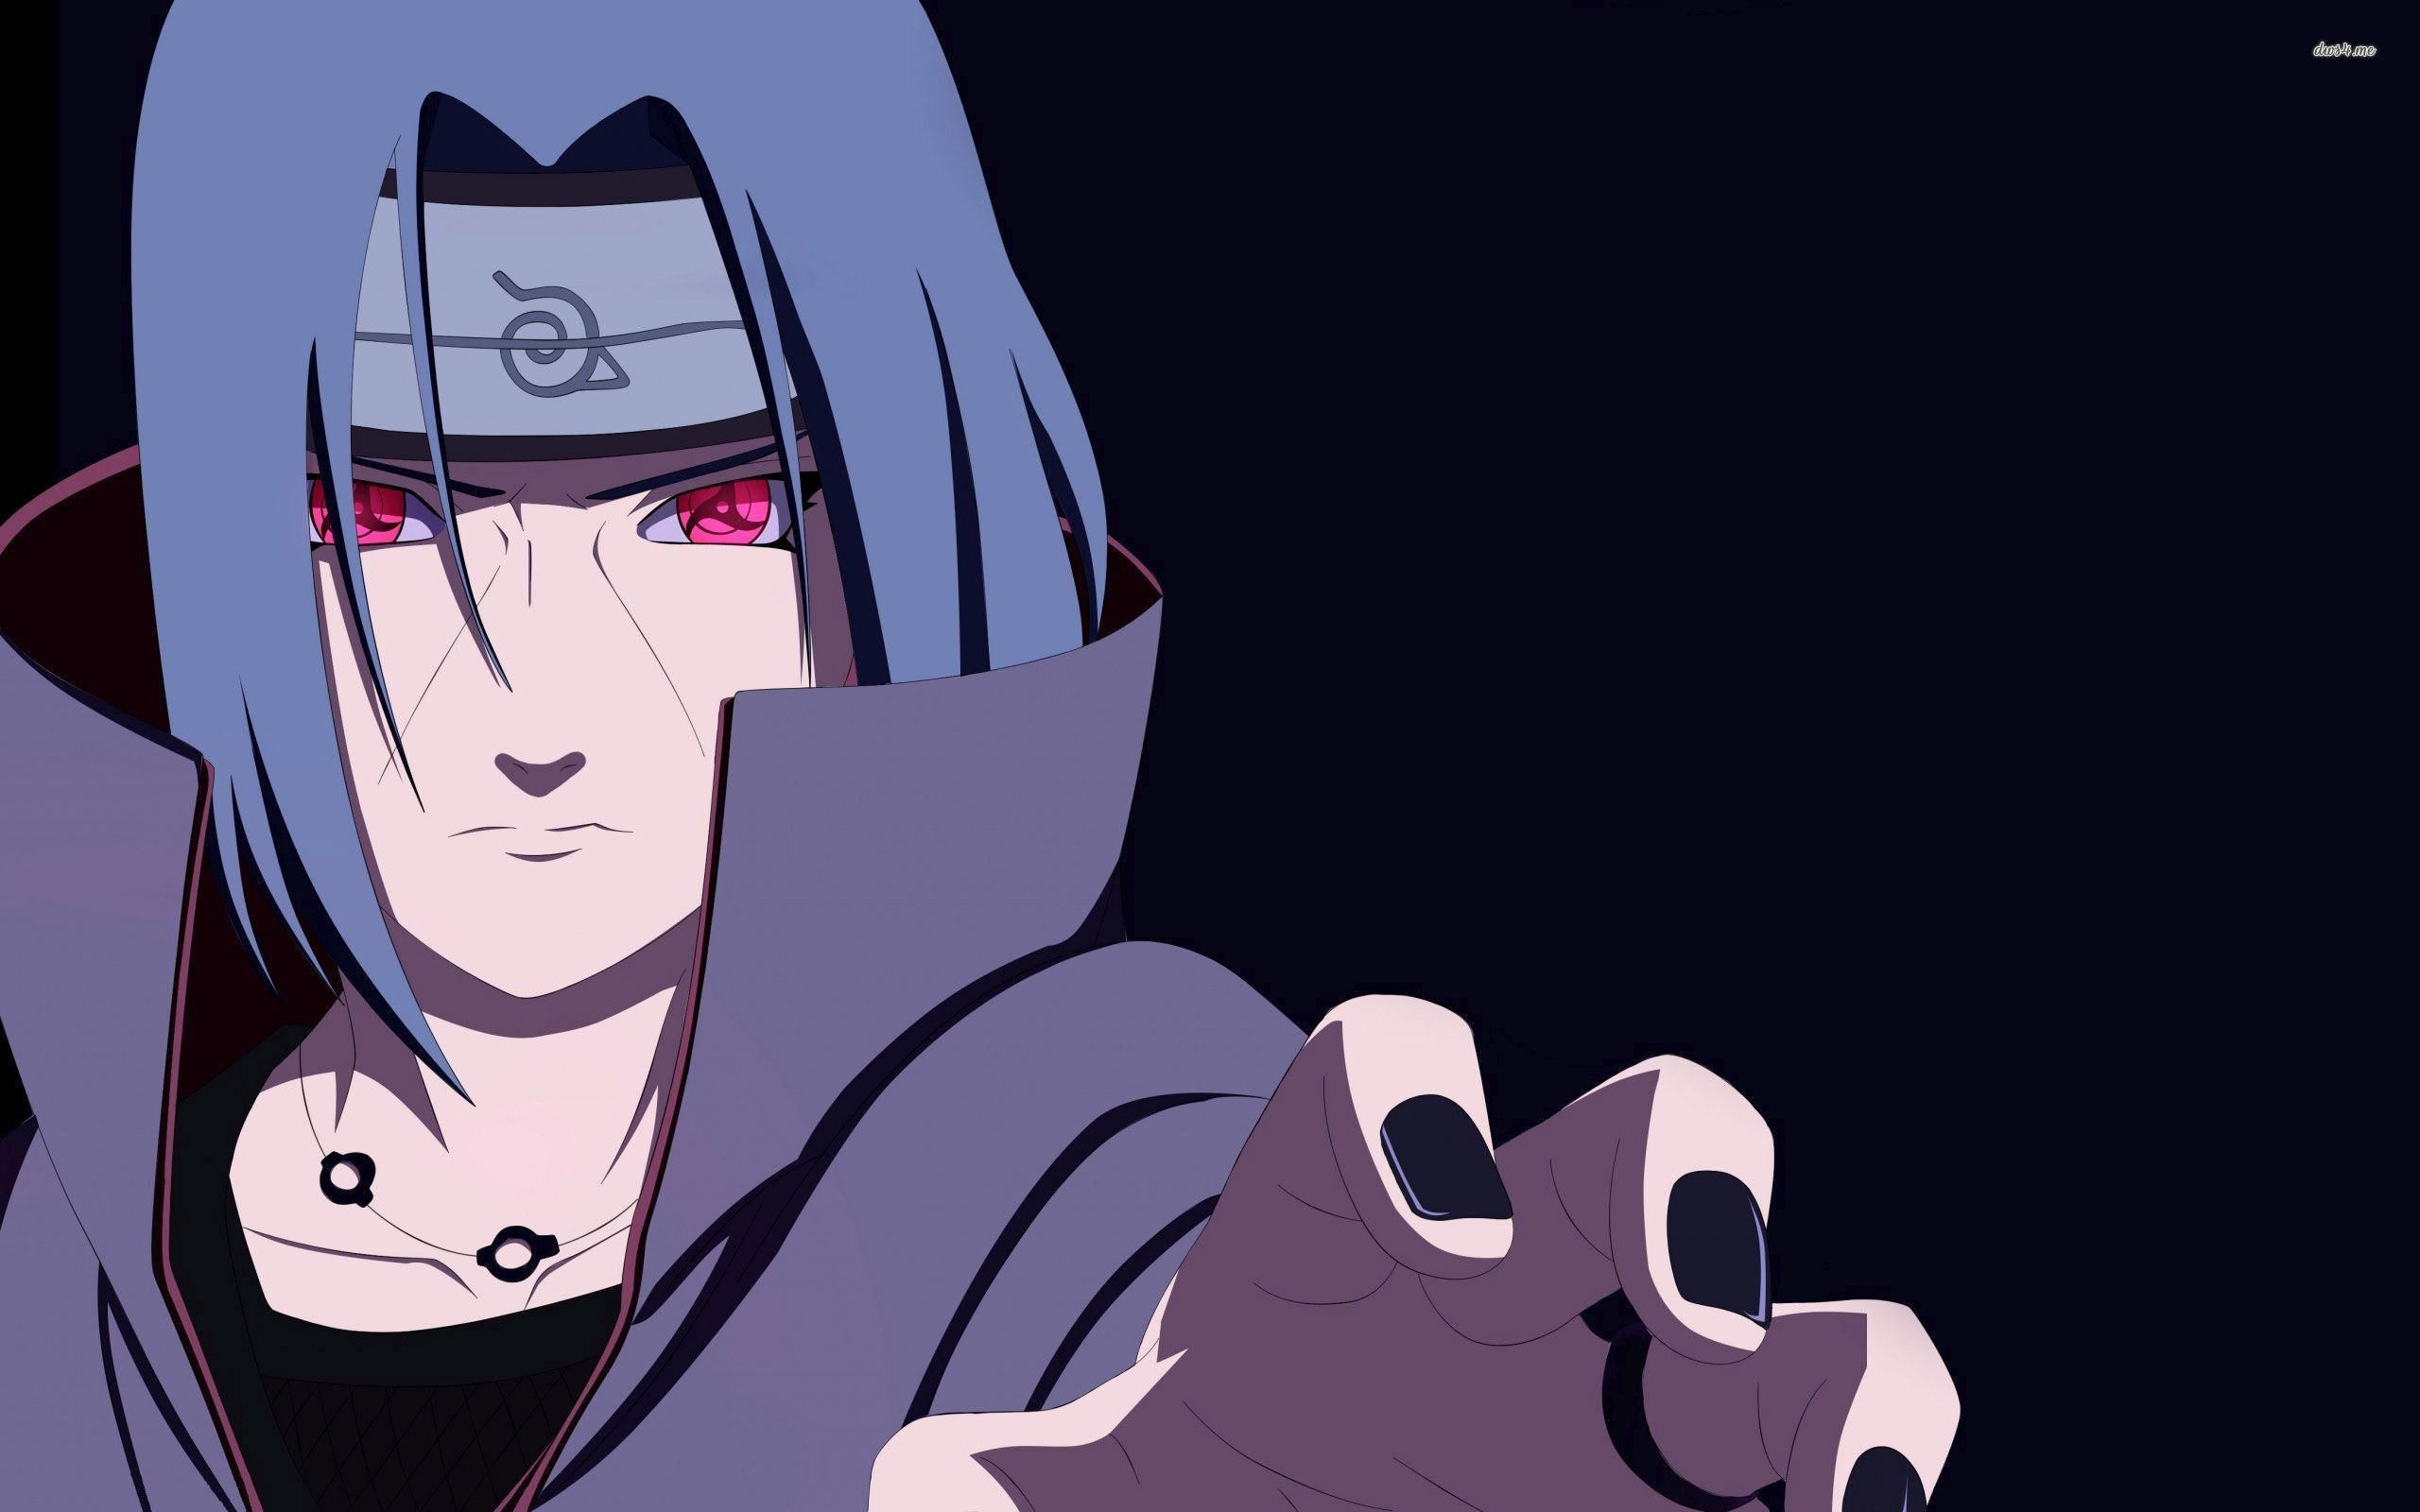 Itachi Backgrounds 76 Pictures